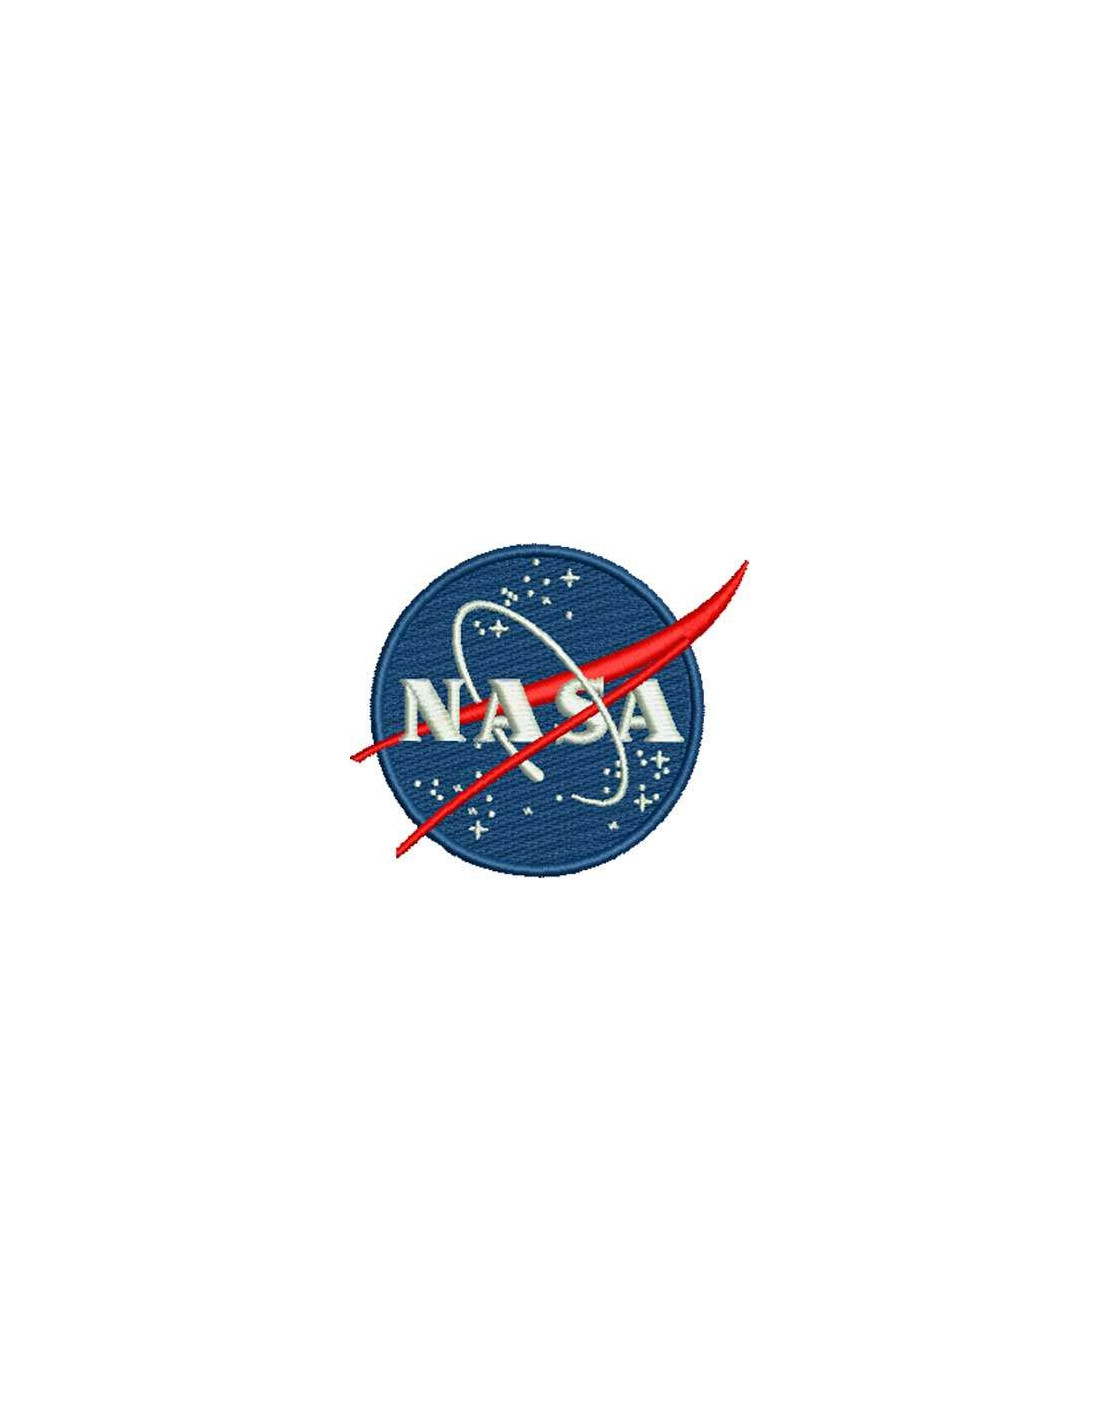 Download Nasa Shield For Embroidery Yellowimages Mockups